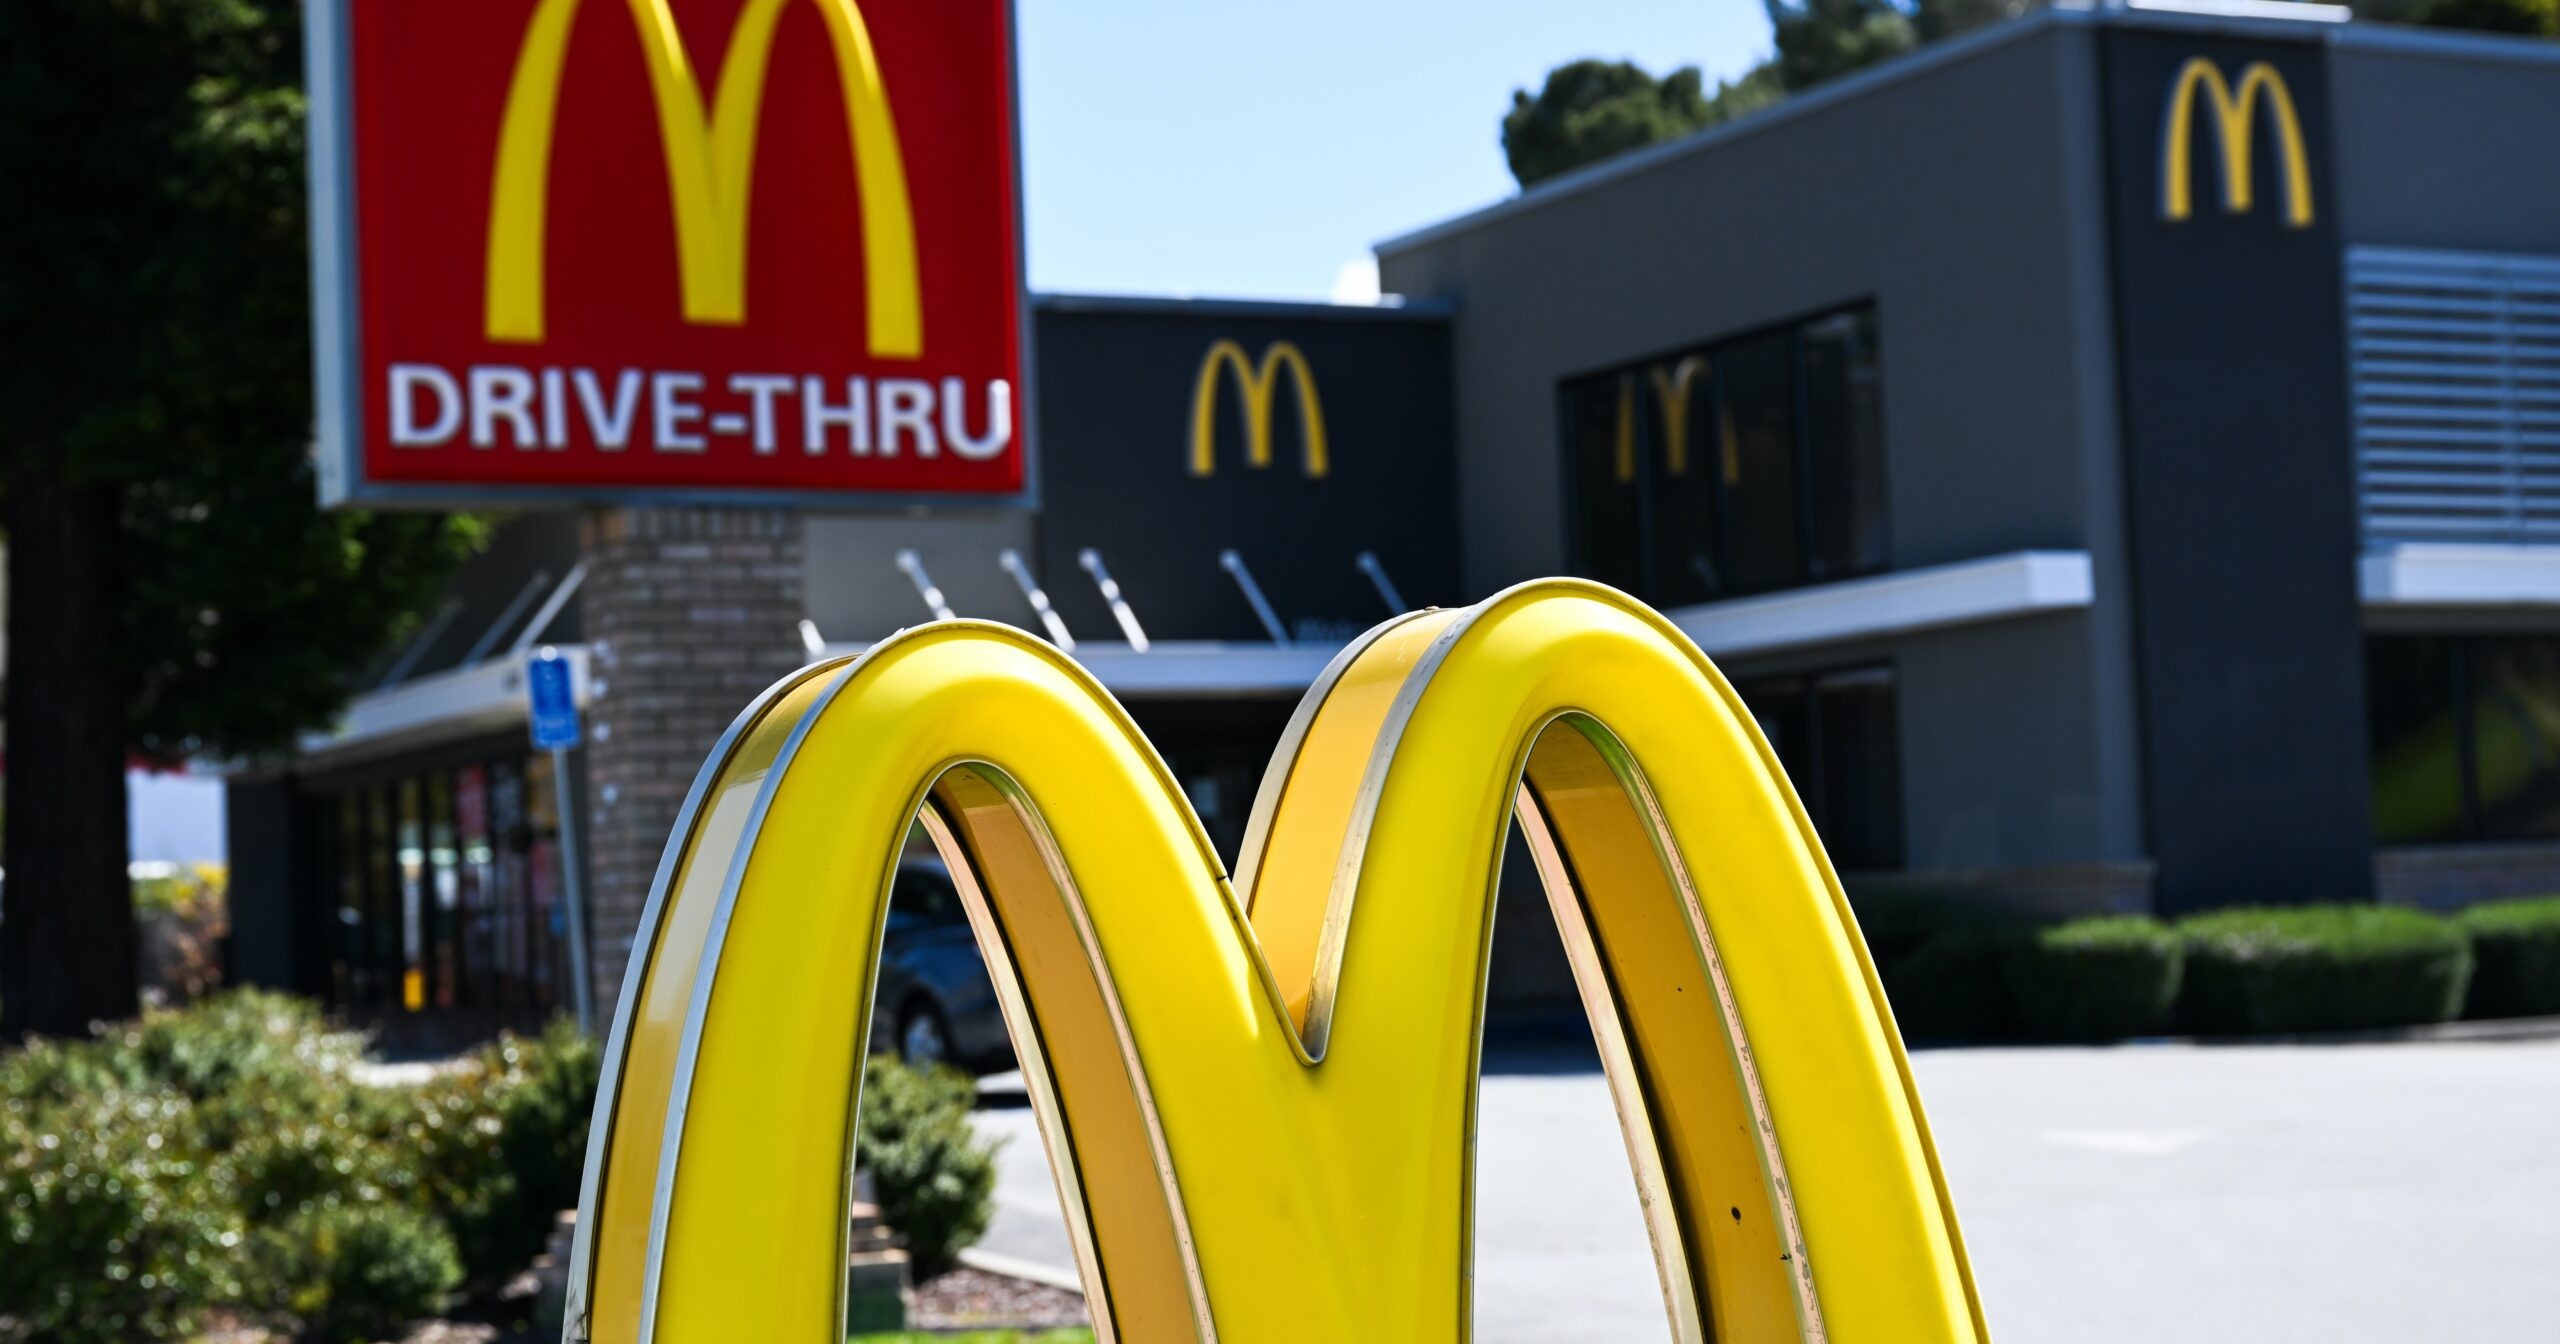 McDonald's closes offices ahead of layoffs